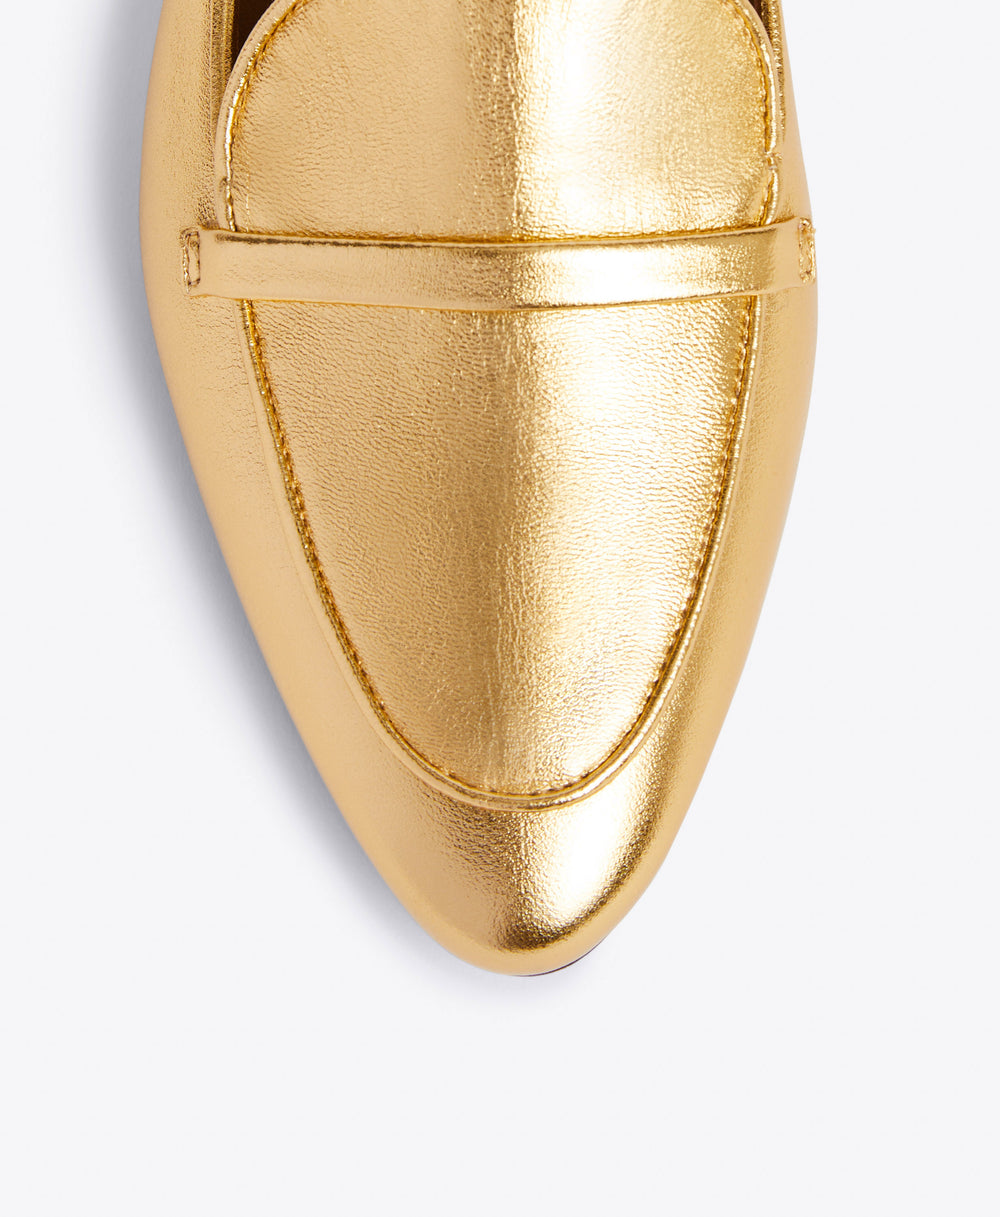 Gold Metallic Nappa Loafers - Elongated Almond Toe with Strap Detail on Monoblock | Malone Souliers